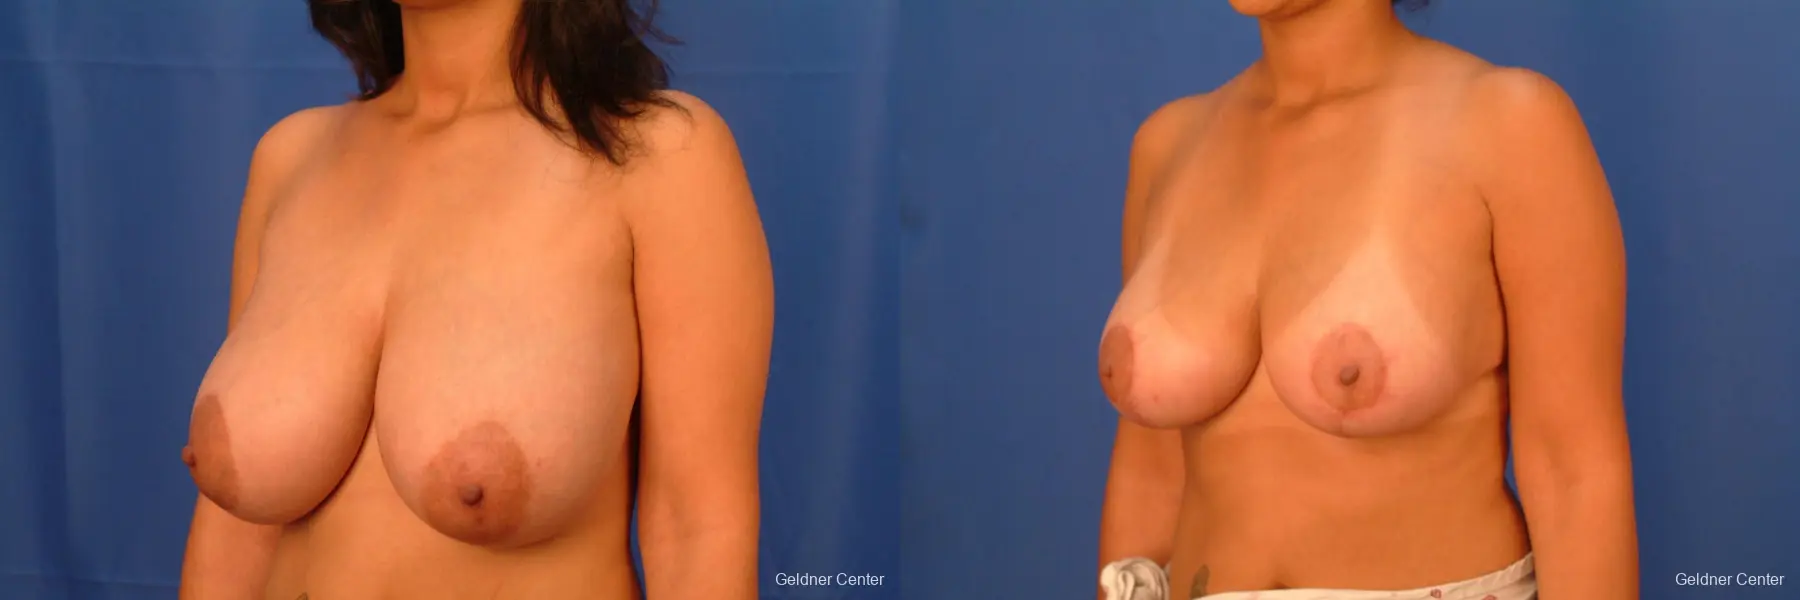 Breast Reduction Lake Shore Dr, Chicago 2417 - Before and After 3